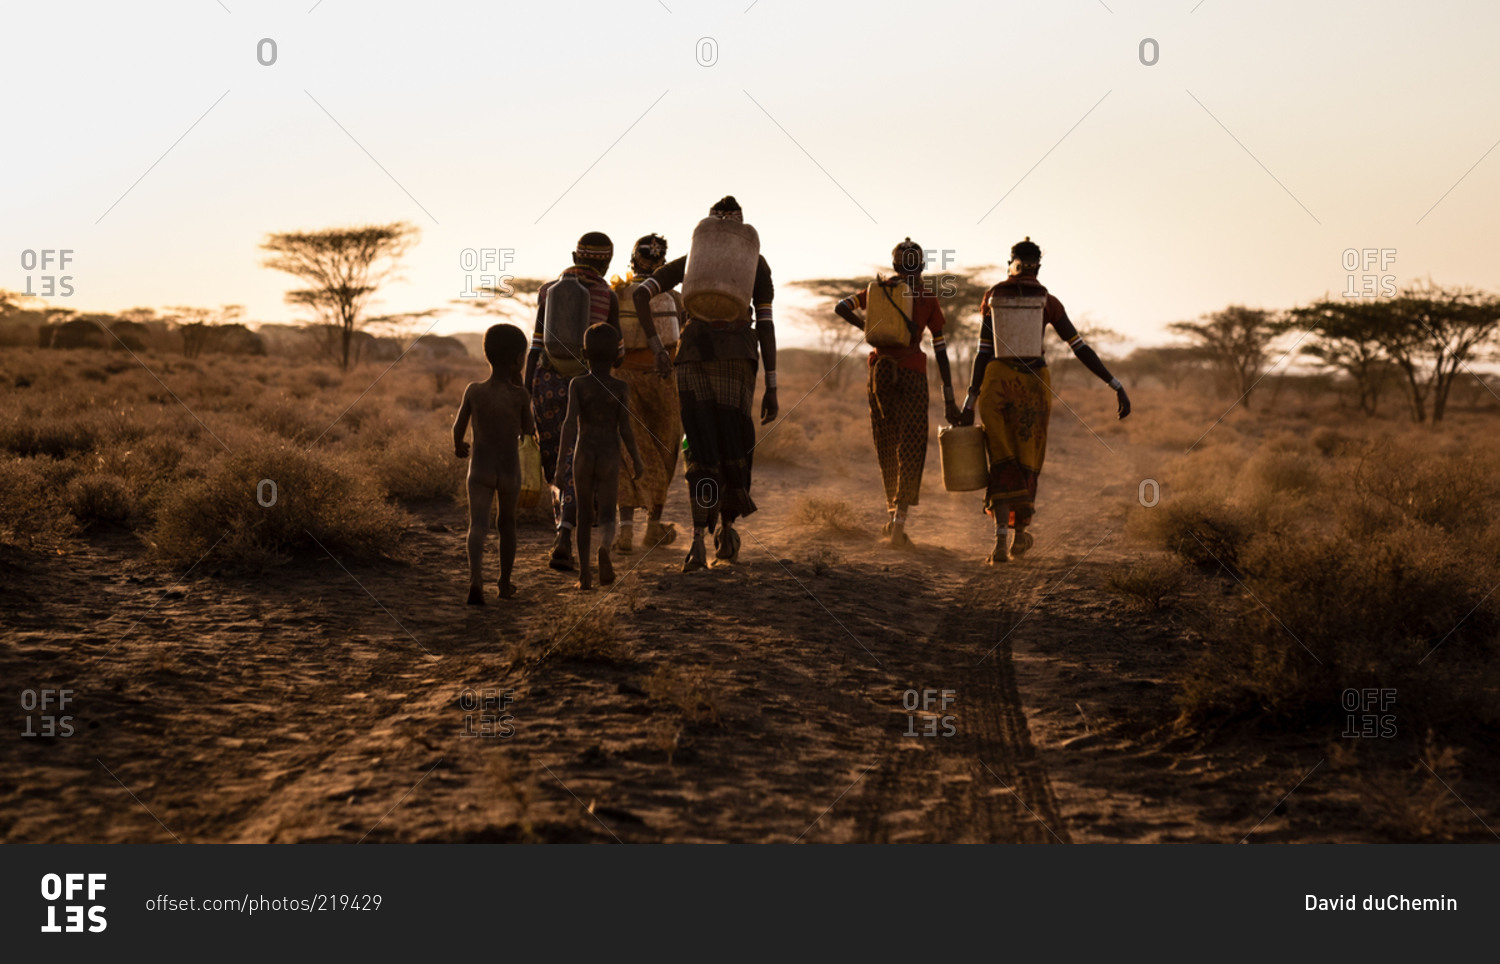 Families head home after fetching water from a borehole in Northern Kenya, Africa